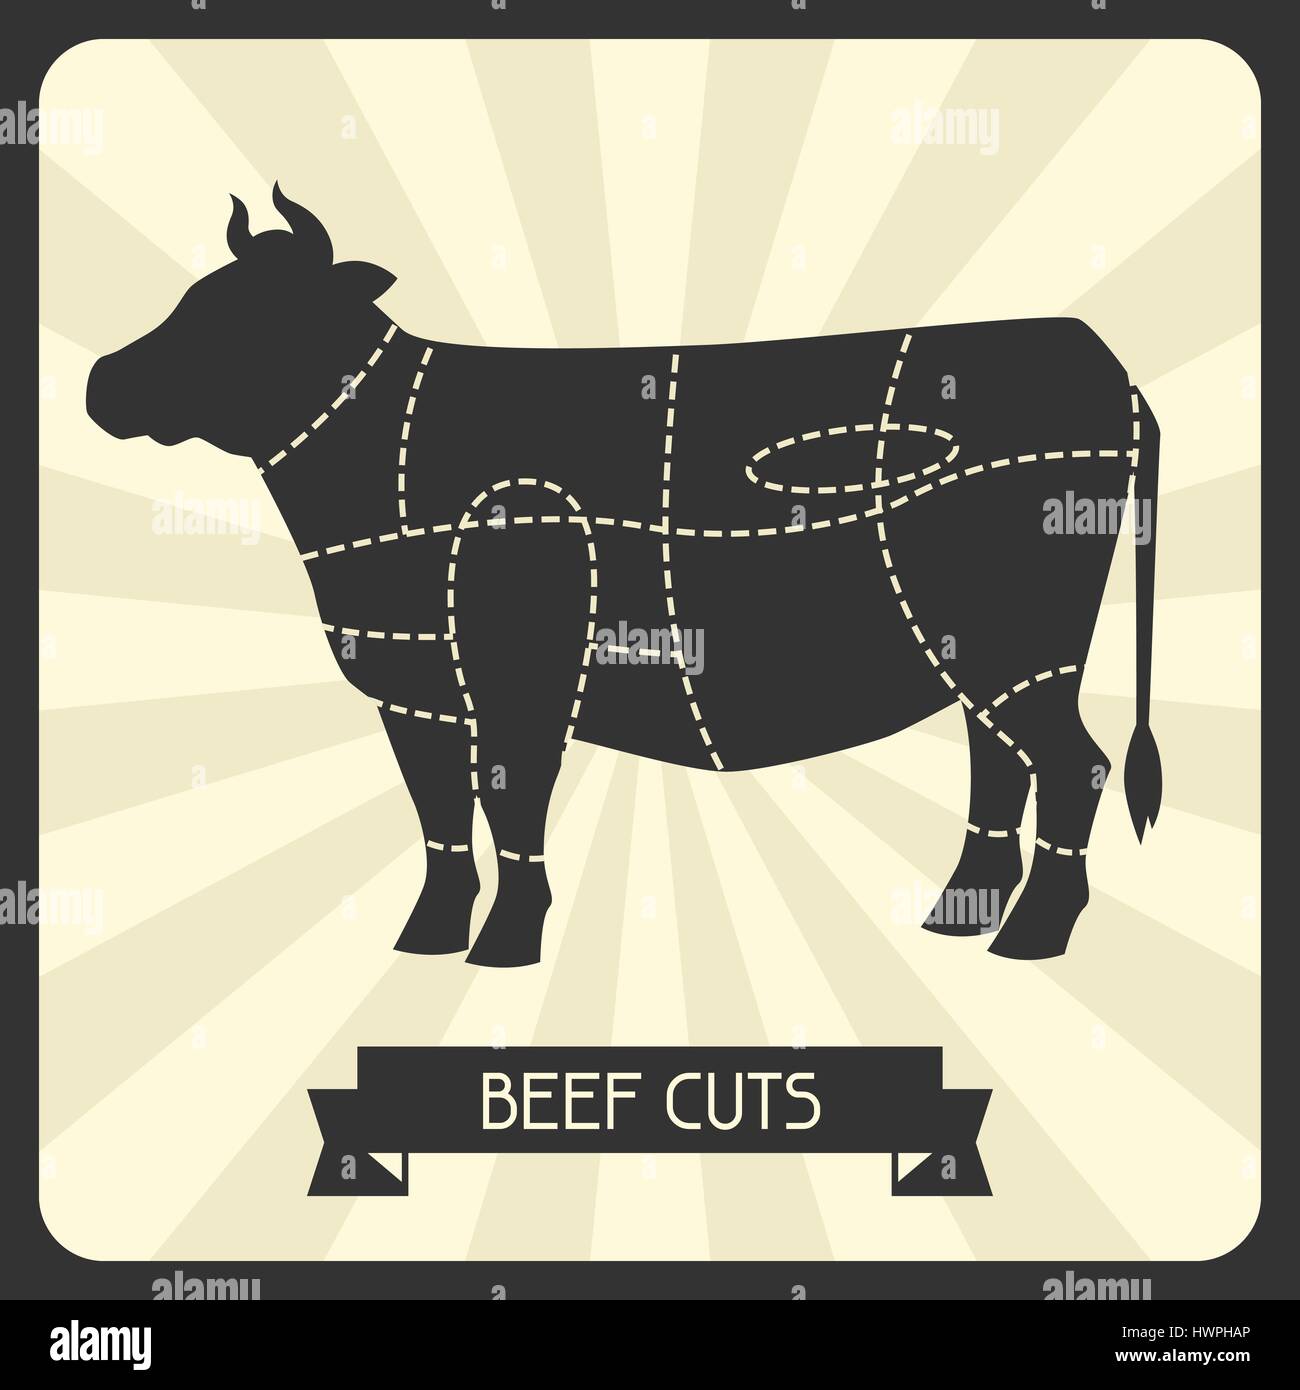 Beef cuts. Butchers cheme cutting meat illustration Stock Vector